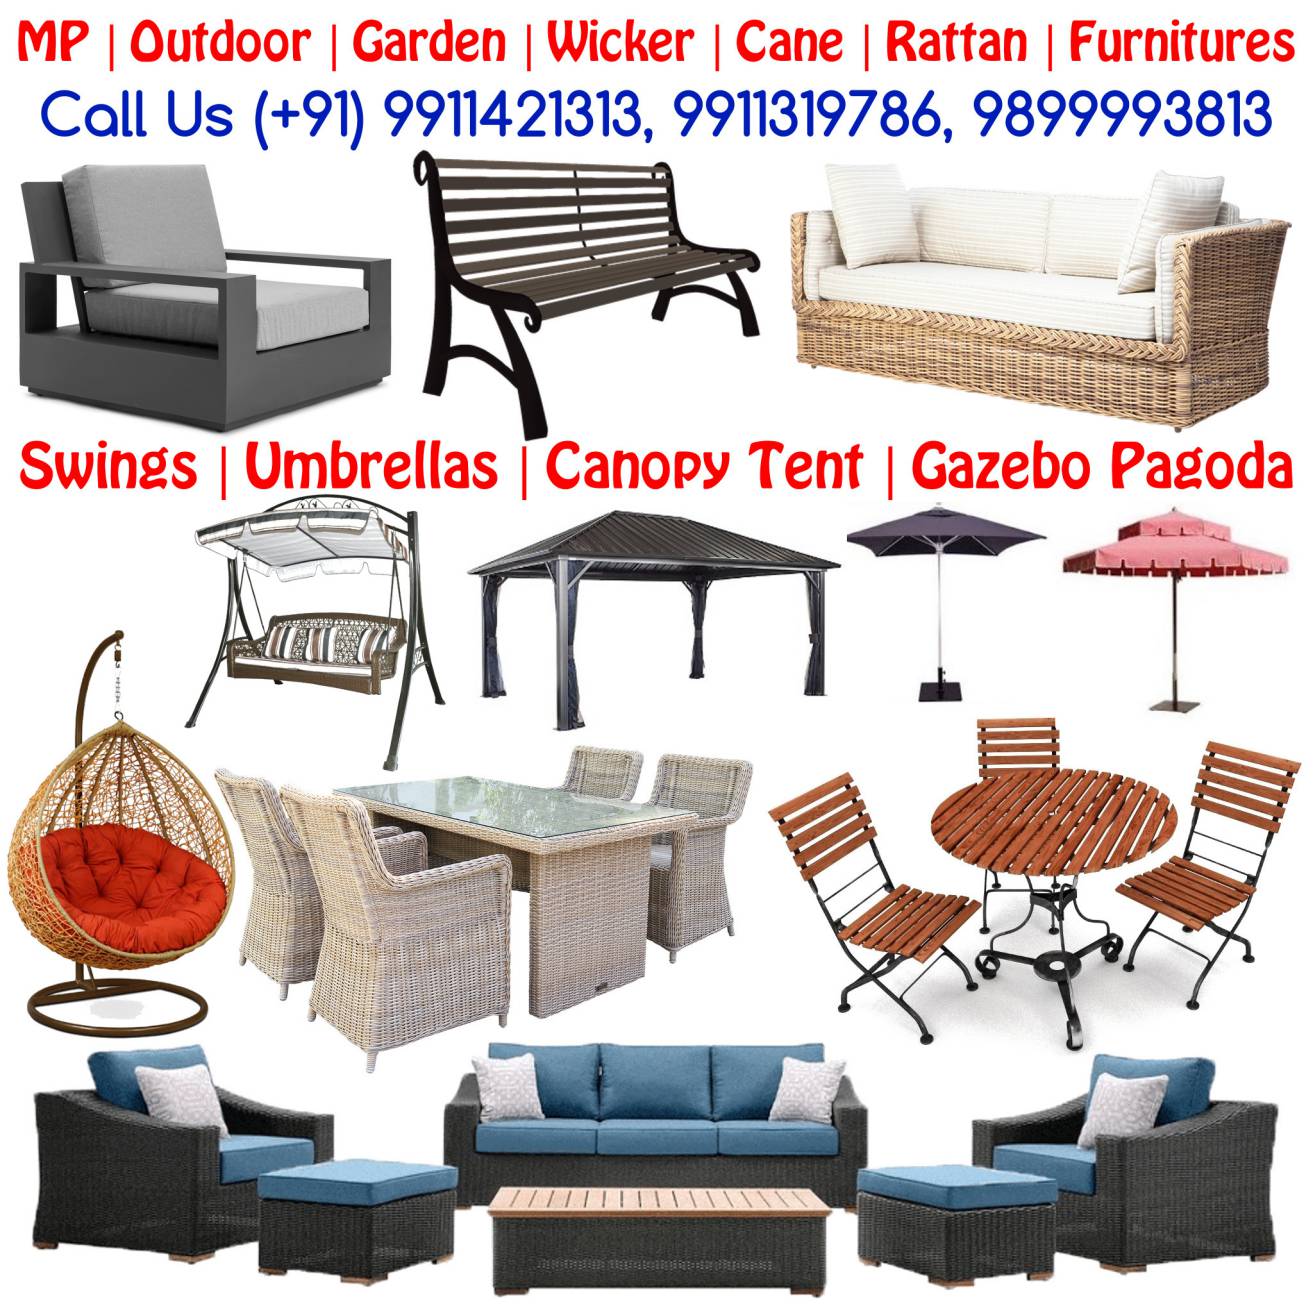 Outdoor Furnitures Manufacturers, Suppliers, Retailers, Wholesalers Maker, Manufacturing Companies.